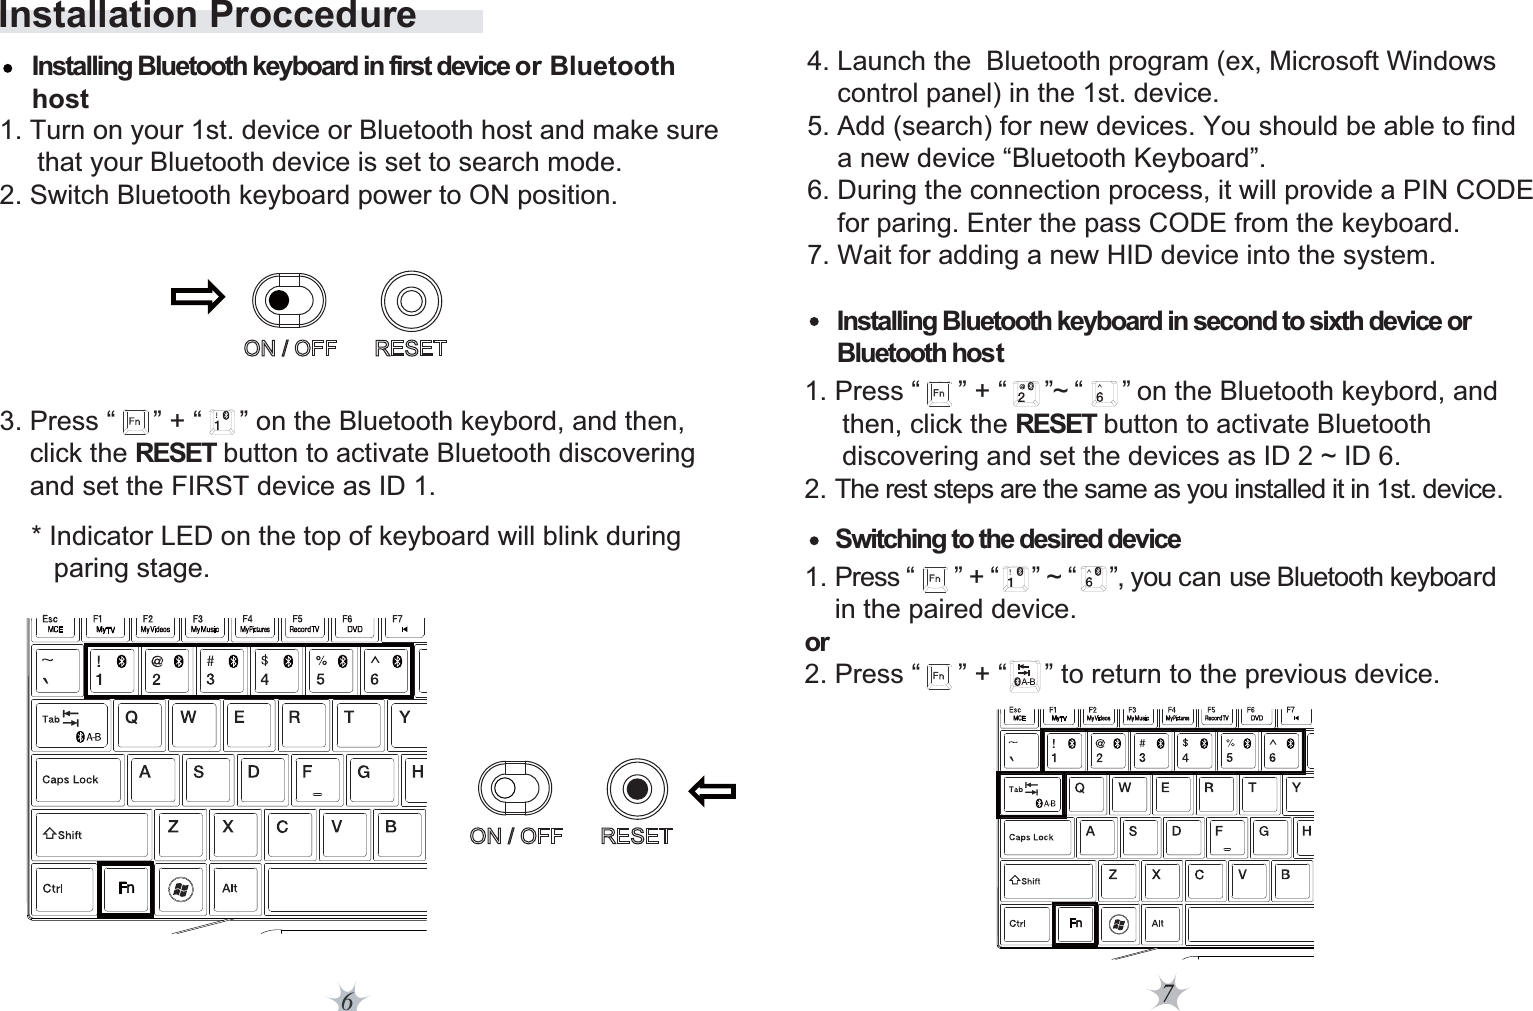 7Installation Proccedure6* Indicator LED on the top of keyboard will blink during    paring stage. 4. Launch the  Bluetooth program (ex, Microsoft Windows     control panel) in the 1st. device. 5. Add (search) for new devices. You should be able to find     a new device “Bluetooth Keyboard”. 6. During the connection process, it will provide a PIN CODE     for paring. Enter the pass CODE from the keyboard.7. Wait for adding a new HID device into the system.Installing Bluetooth keyboard in second to sixth device or Bluetooth hostSwitching to the desired deviceInstalling Bluetooth keyboard in first device or Bluetooth host  1. Turn on your 1st. device or Bluetooth host and make sure      that your Bluetooth device is set to search mode. 2. Switch Bluetooth keyboard power to ON position.  1. Press “      ” + “     ” ~ “     ”, you can use Bluetooth keyboard     in the paired device.or 2. Press “     ” + “     ” to return to the previous device.3. Press “     ” + “     ” on the Bluetooth keybord, and then,     click the RESET button to activate Bluetooth discovering     and set the FIRST device as ID 1.  1. Press “     ” + “     ”~ “      ” on the Bluetooth keybord, and      then, click the RESET button to activate Bluetooth      discovering and set the devices as ID 2 ~ ID 6.2. The rest steps are the same as you installed it in 1st. device.           